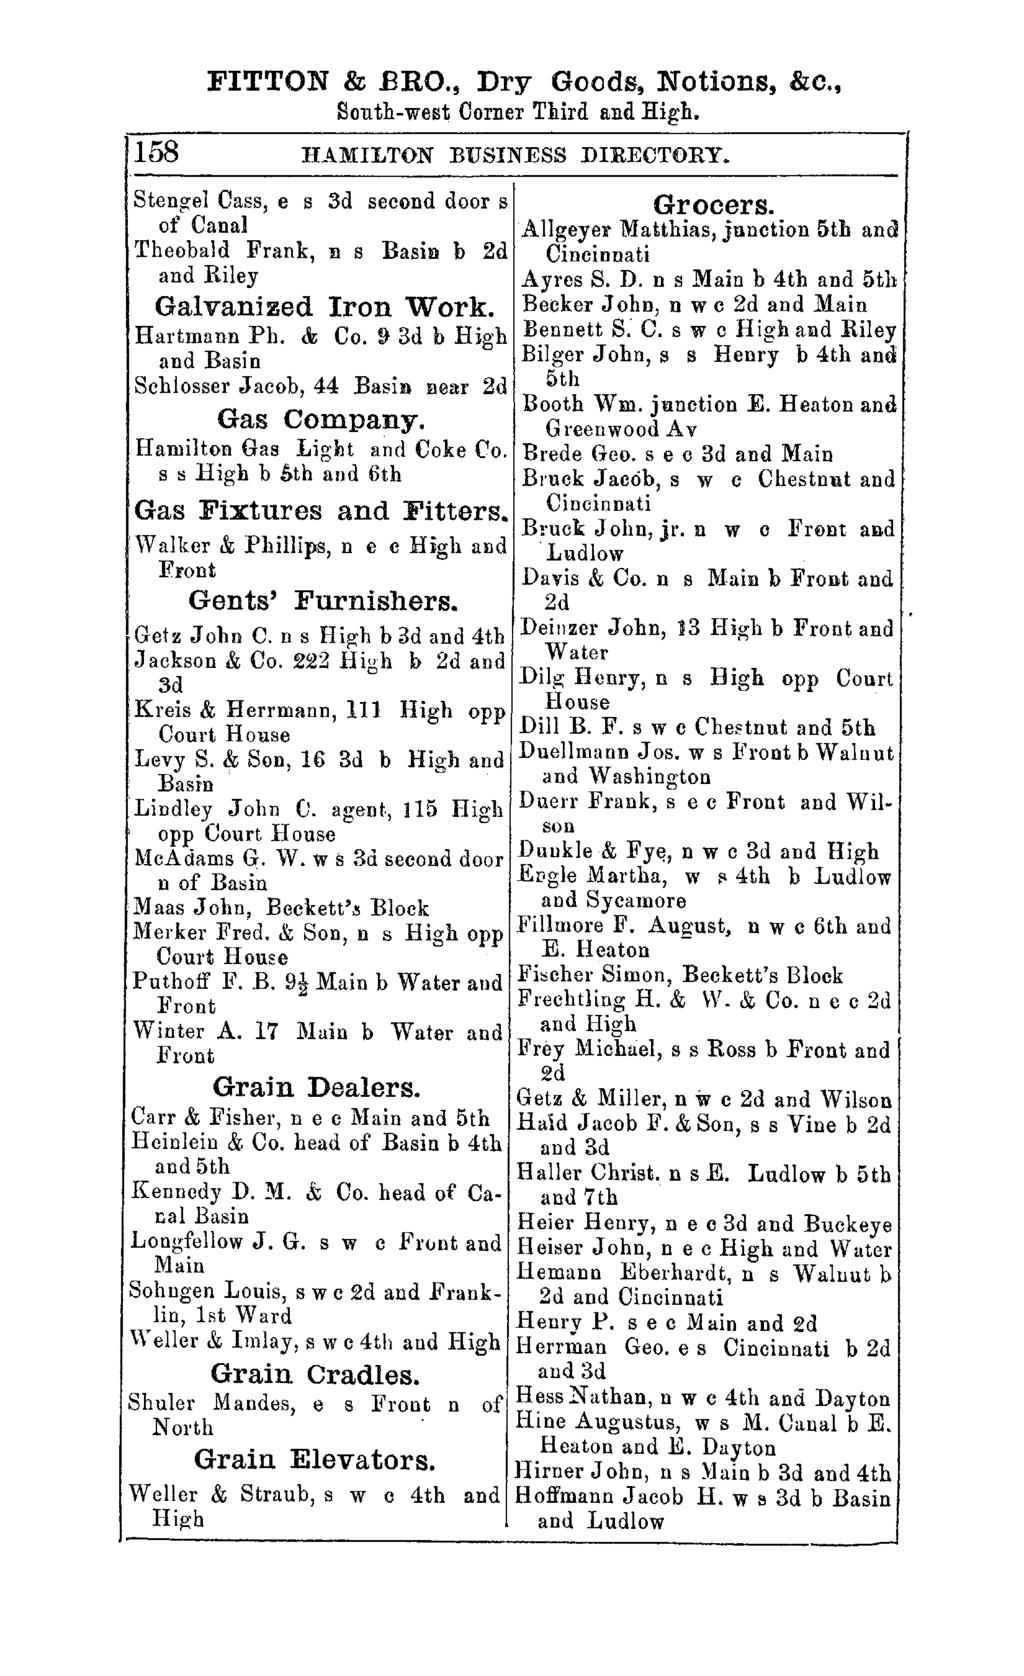 FITTON & BRO., Dry Goods, Notions, &c., South-west Corner Third and High. 158 HAMILTON BUSINESS DIRECTORY. Grocers.